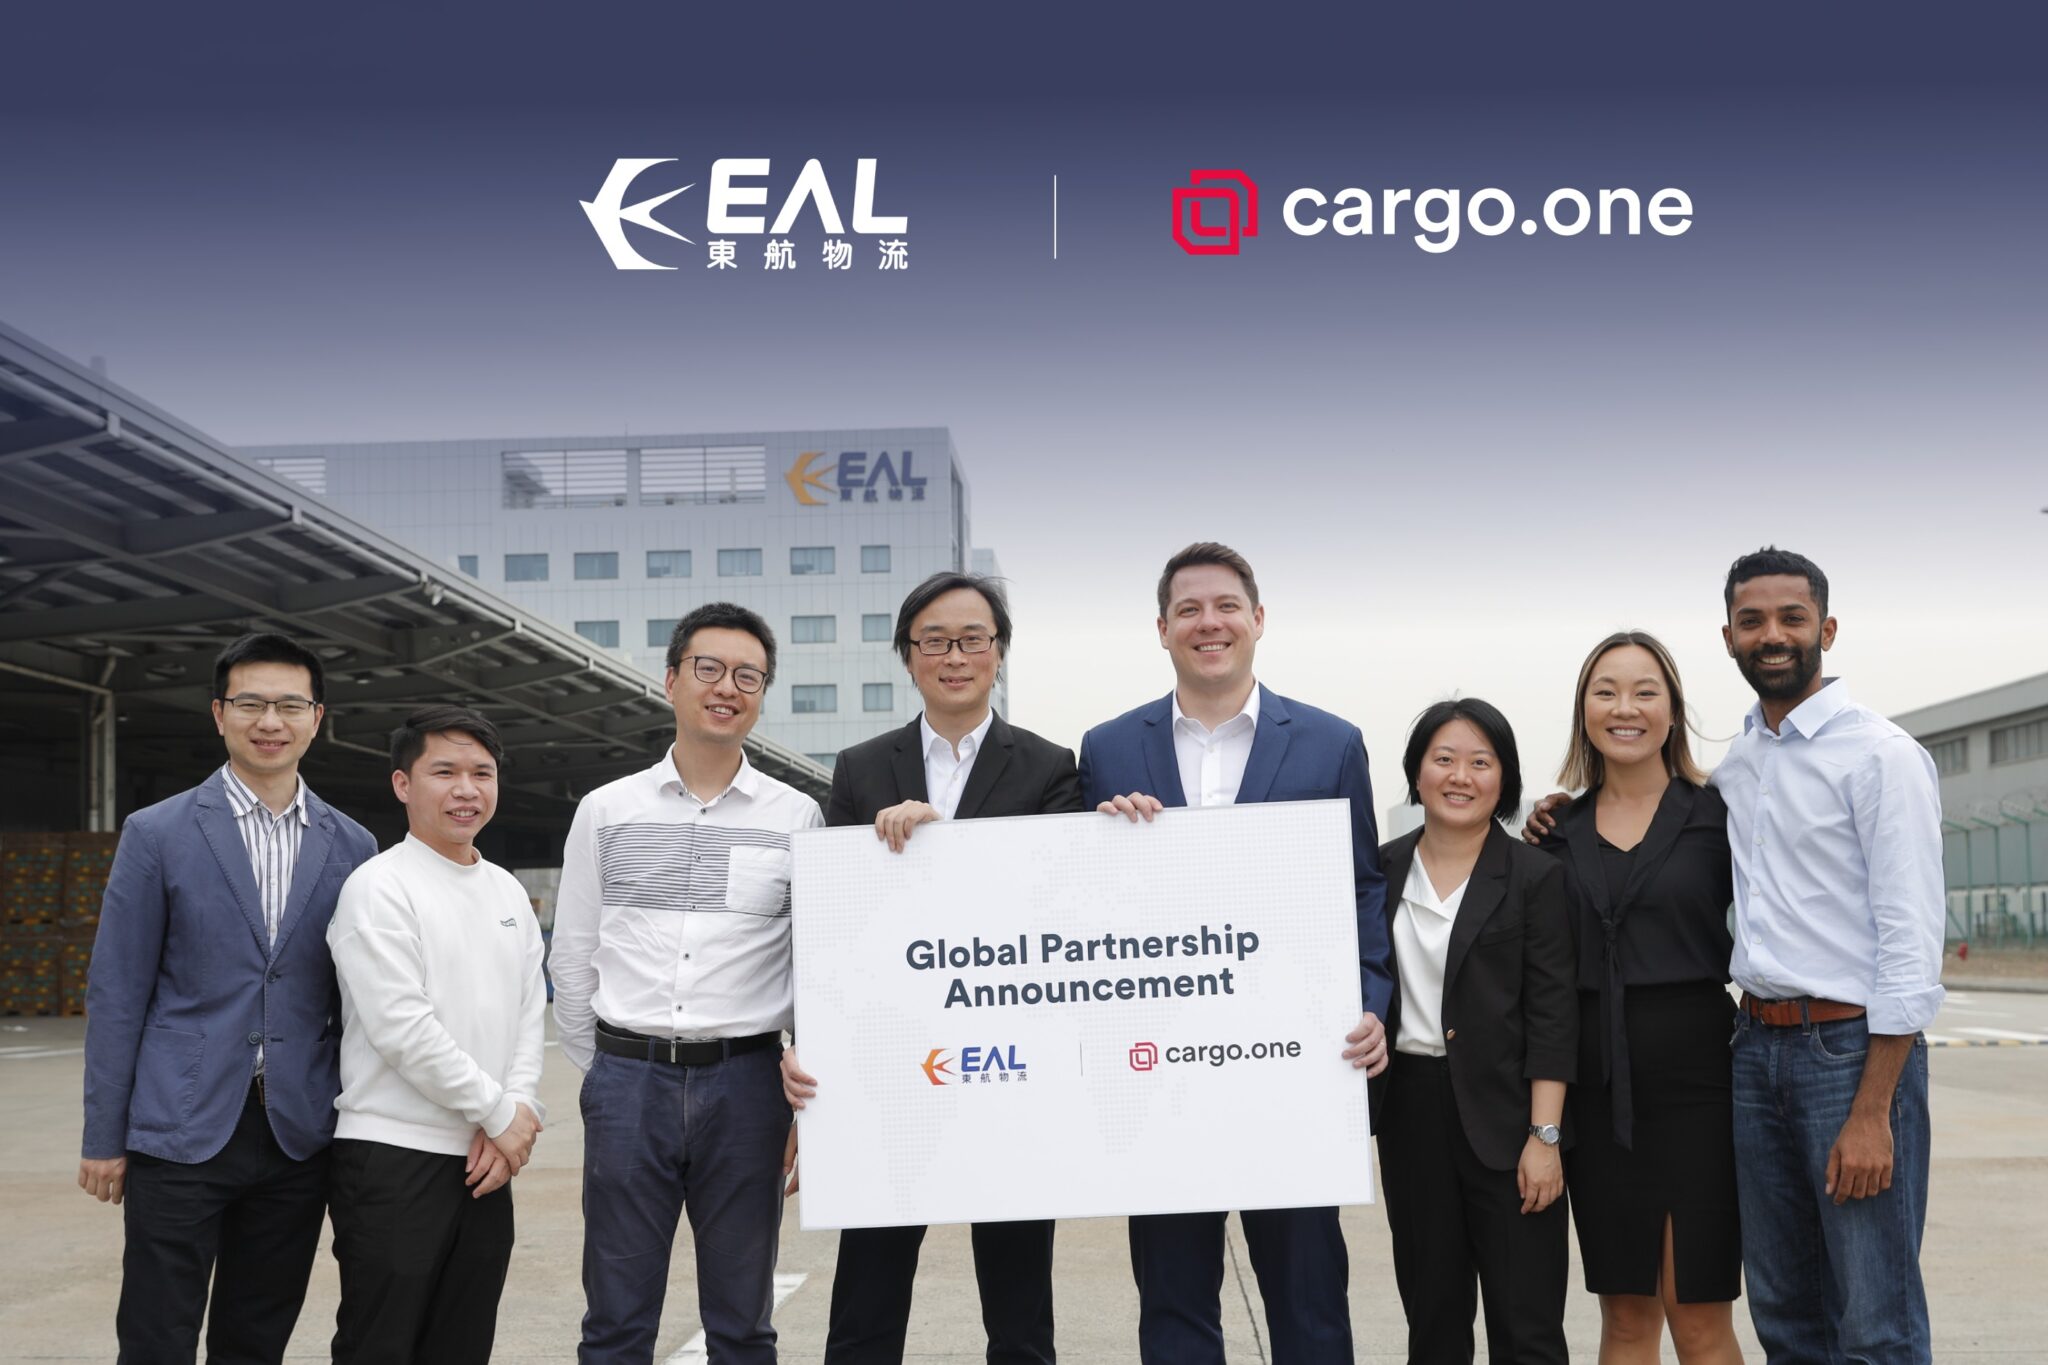 Eastern Air Logistics has partnered with cargo.one